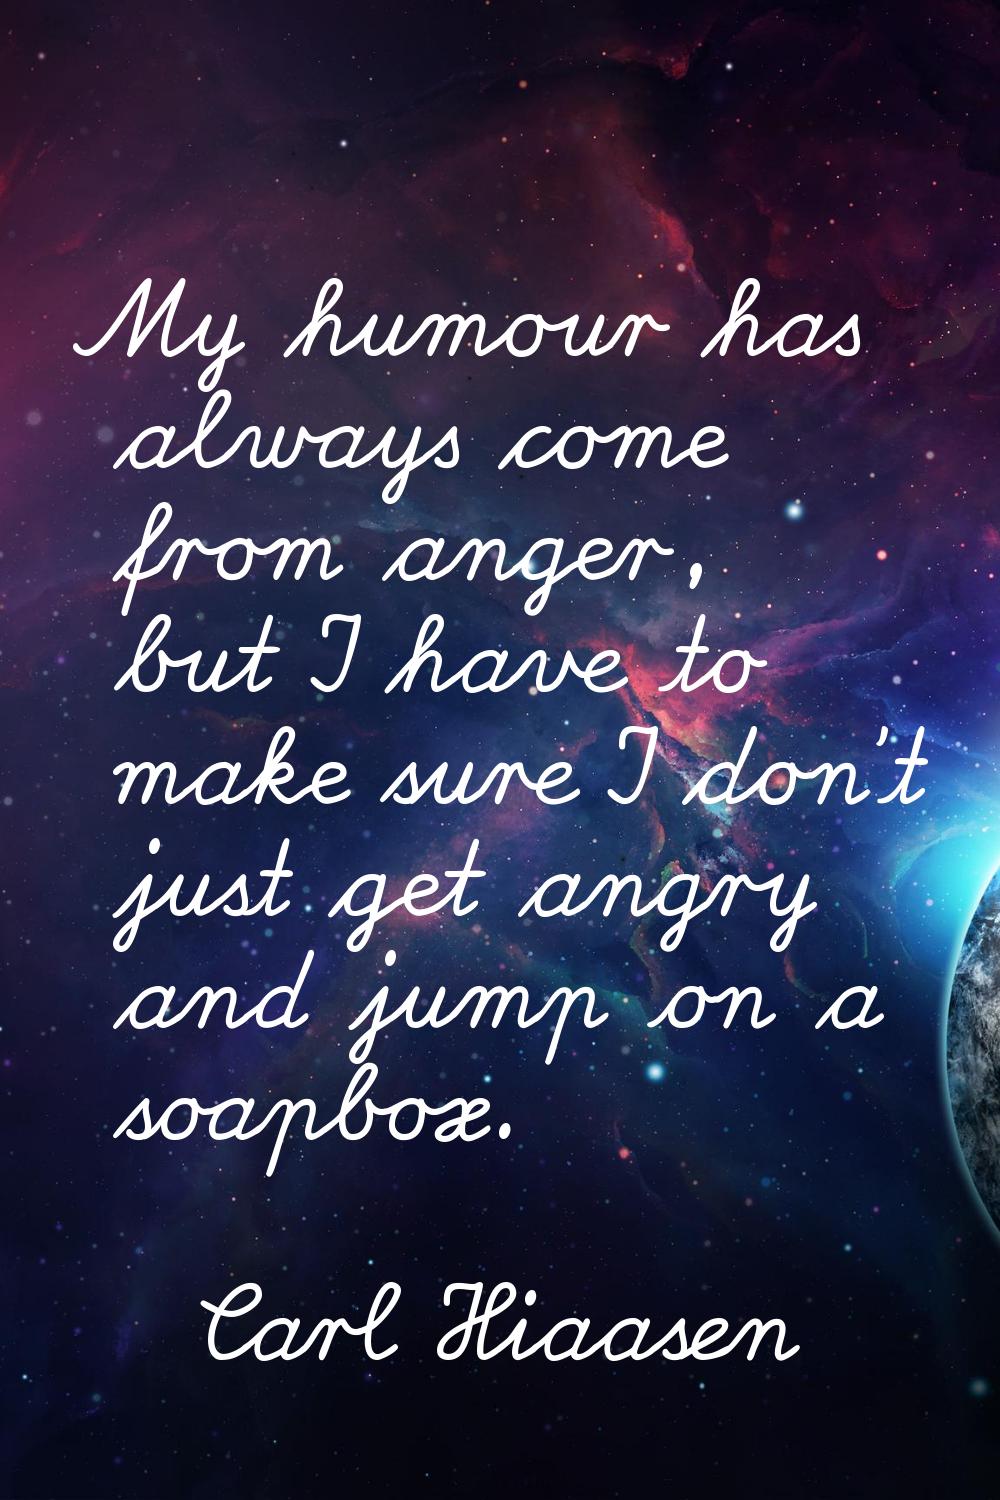 My humour has always come from anger, but I have to make sure I don't just get angry and jump on a 